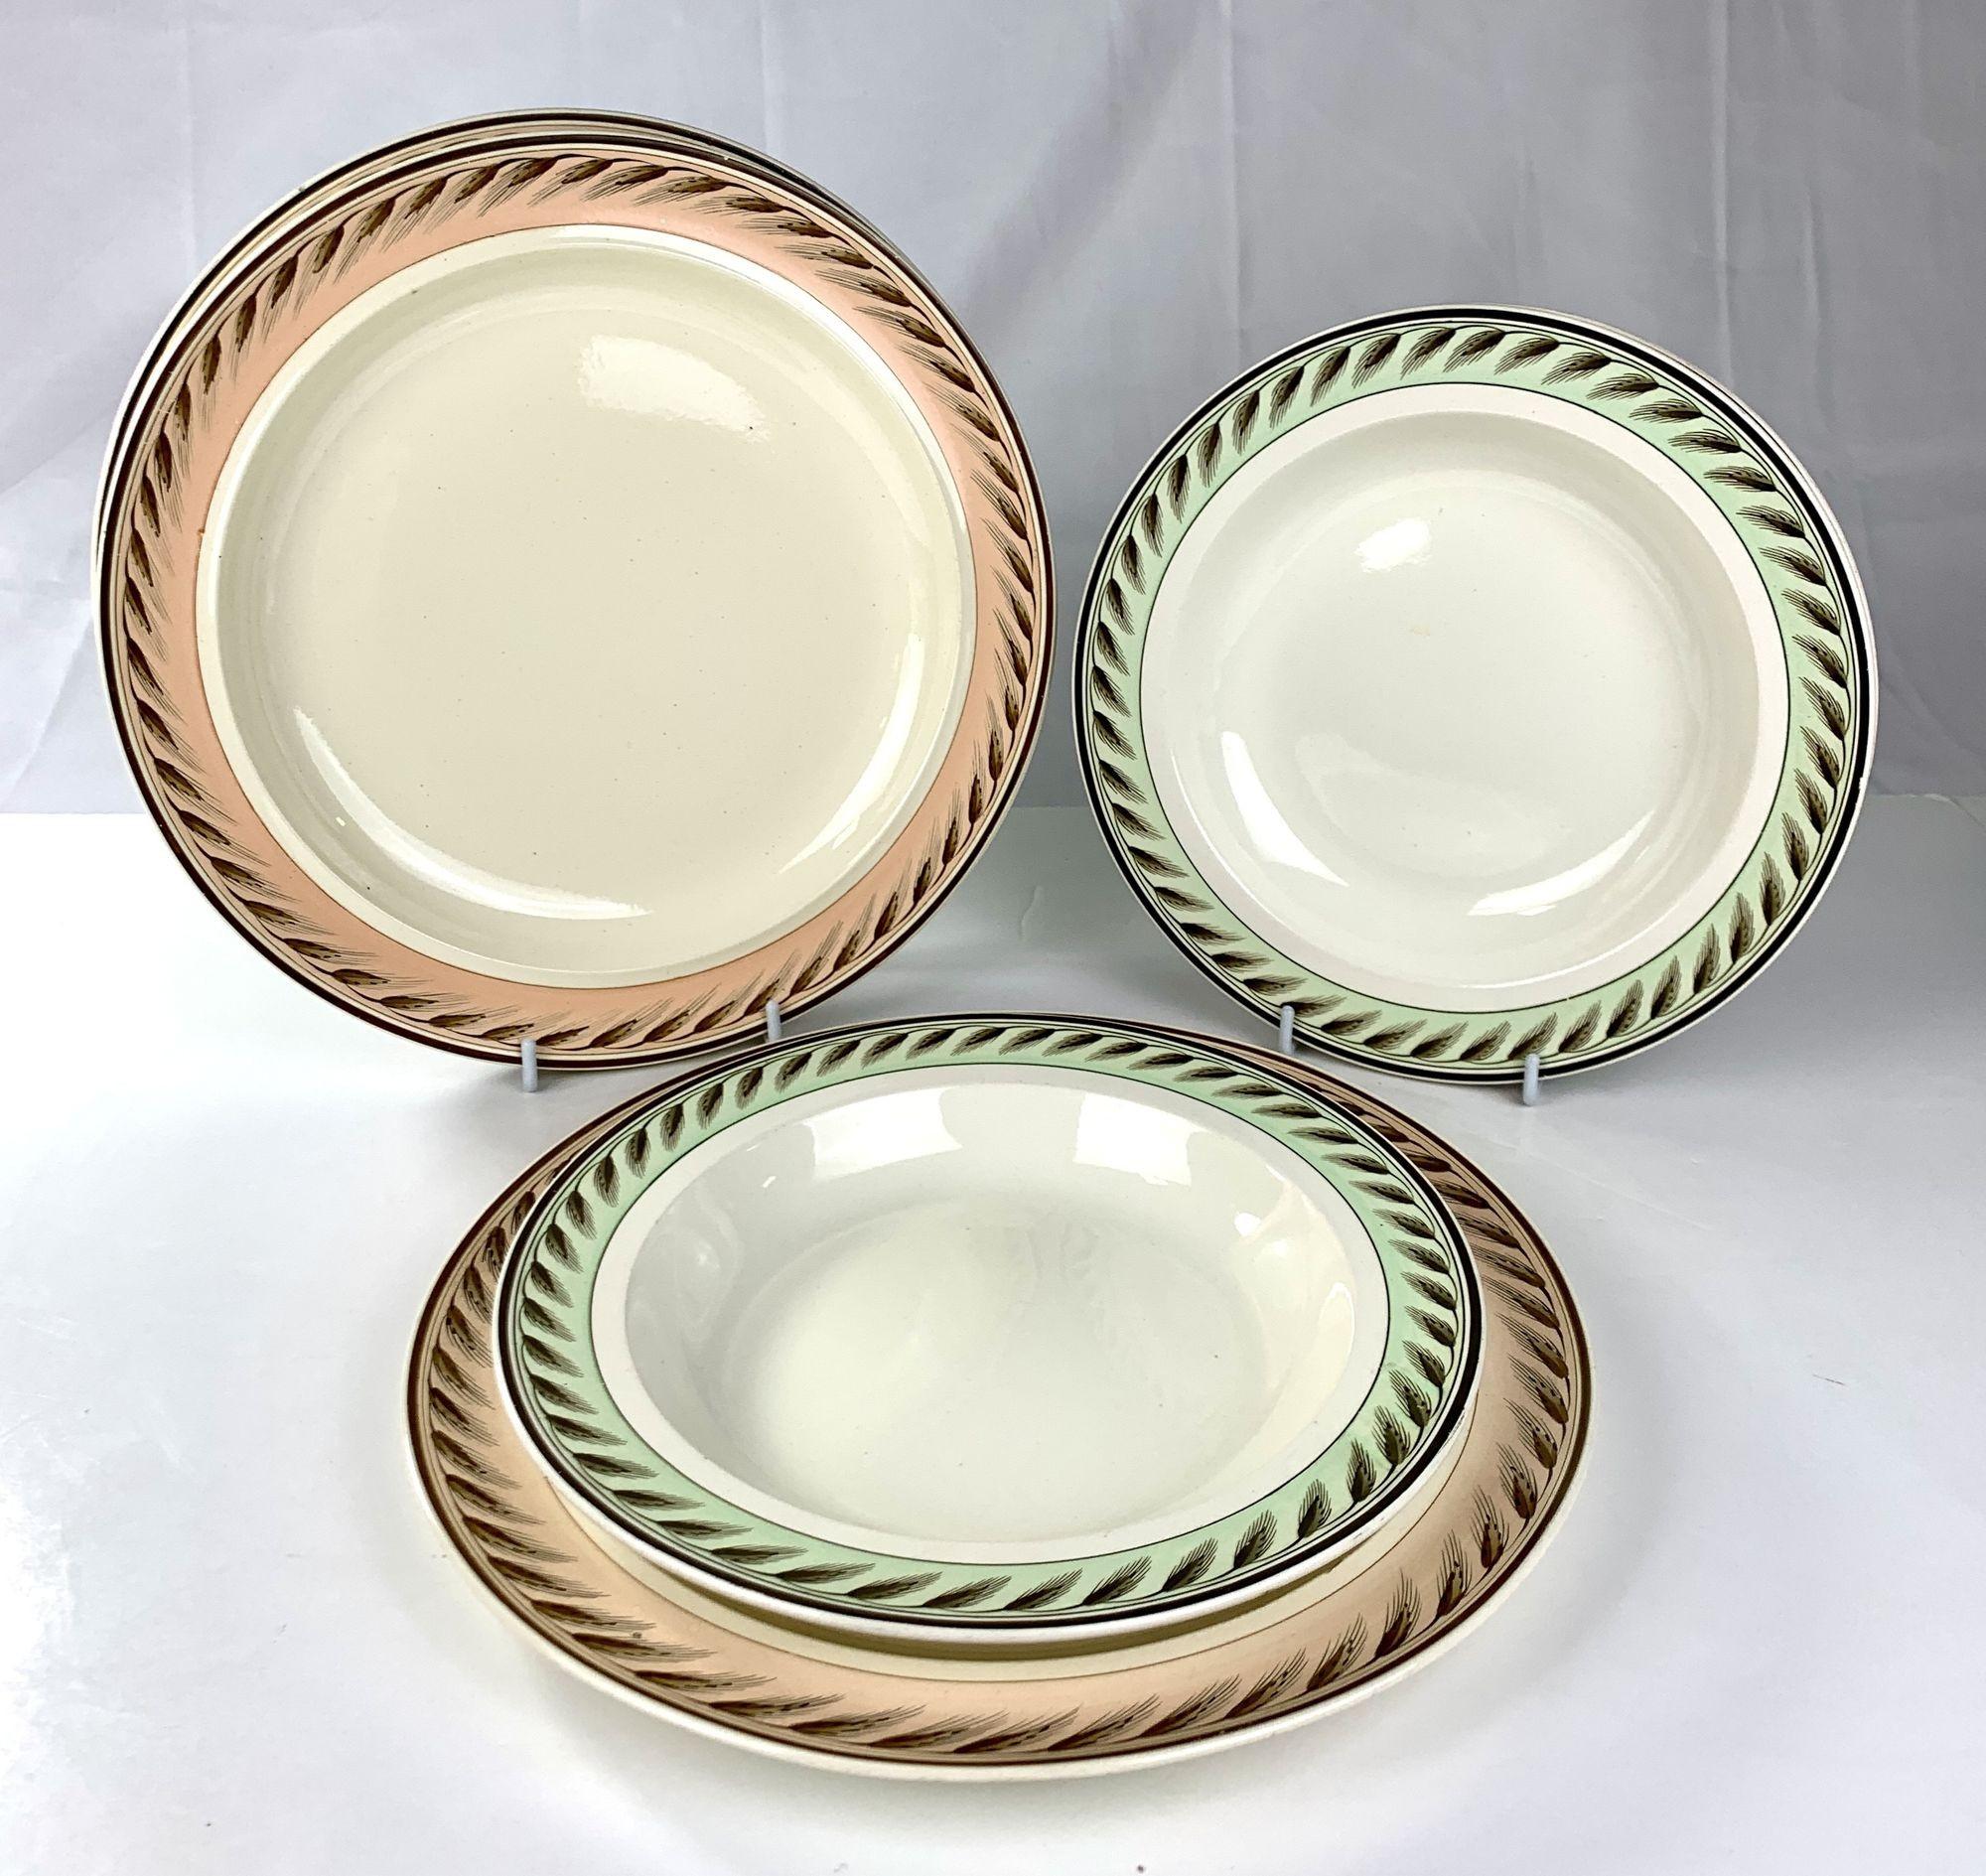 This set of Wedgwood five dinner and salad dishes was made in England in the early 19th century, circa 1820. 
The dishes are decorated with the 18th-century Wedgwood 